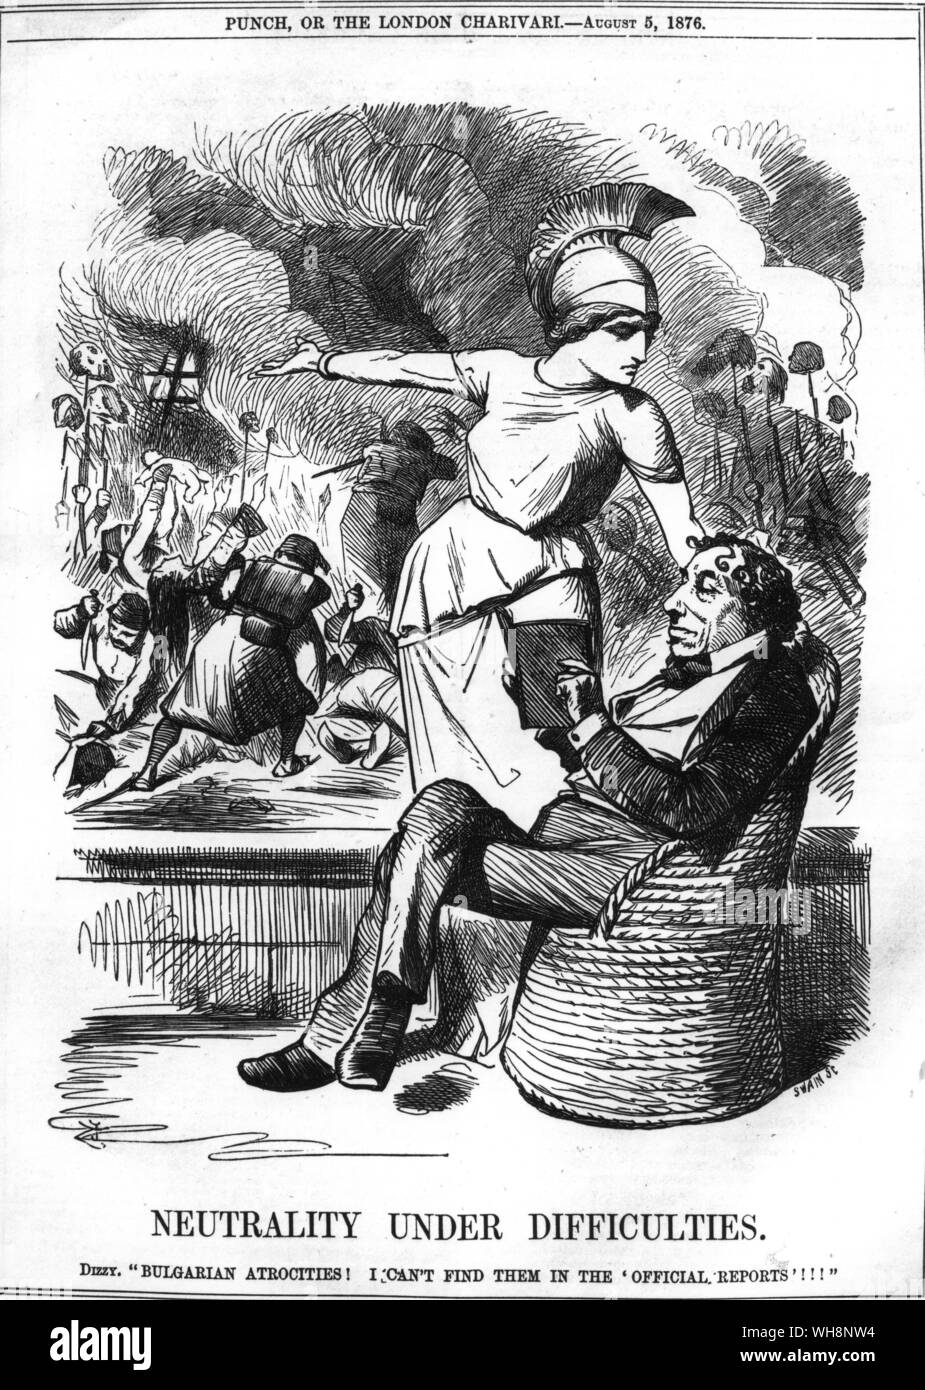 Opinion in England as shown by the figure of Britannia differed to that  held by Disraeli who affected to believe the atrocities had been much  exaggerated by journalists and troublemakers such as